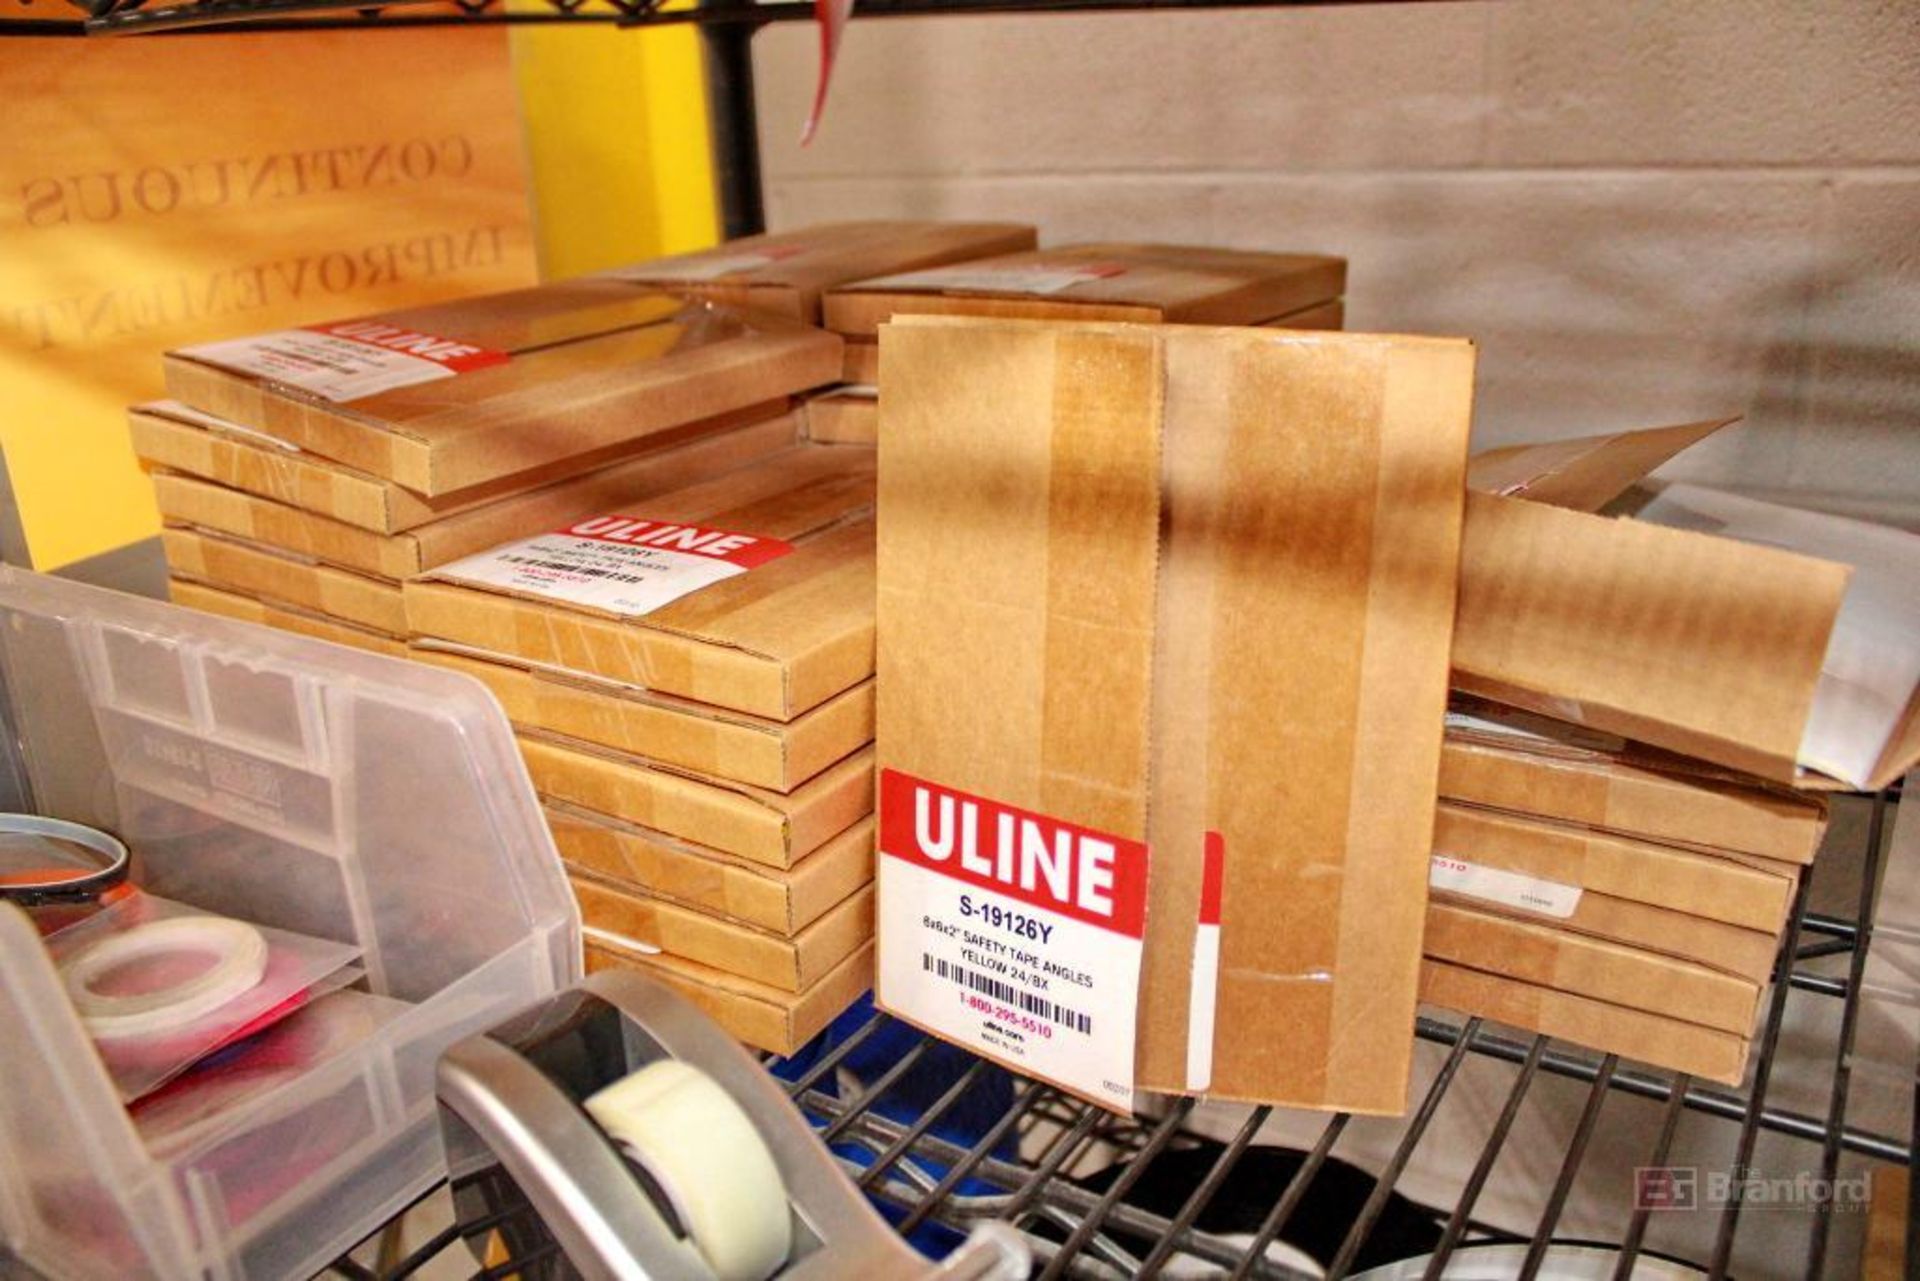 Uline Rolling Rack & Shop Cart with Contents - Image 3 of 5